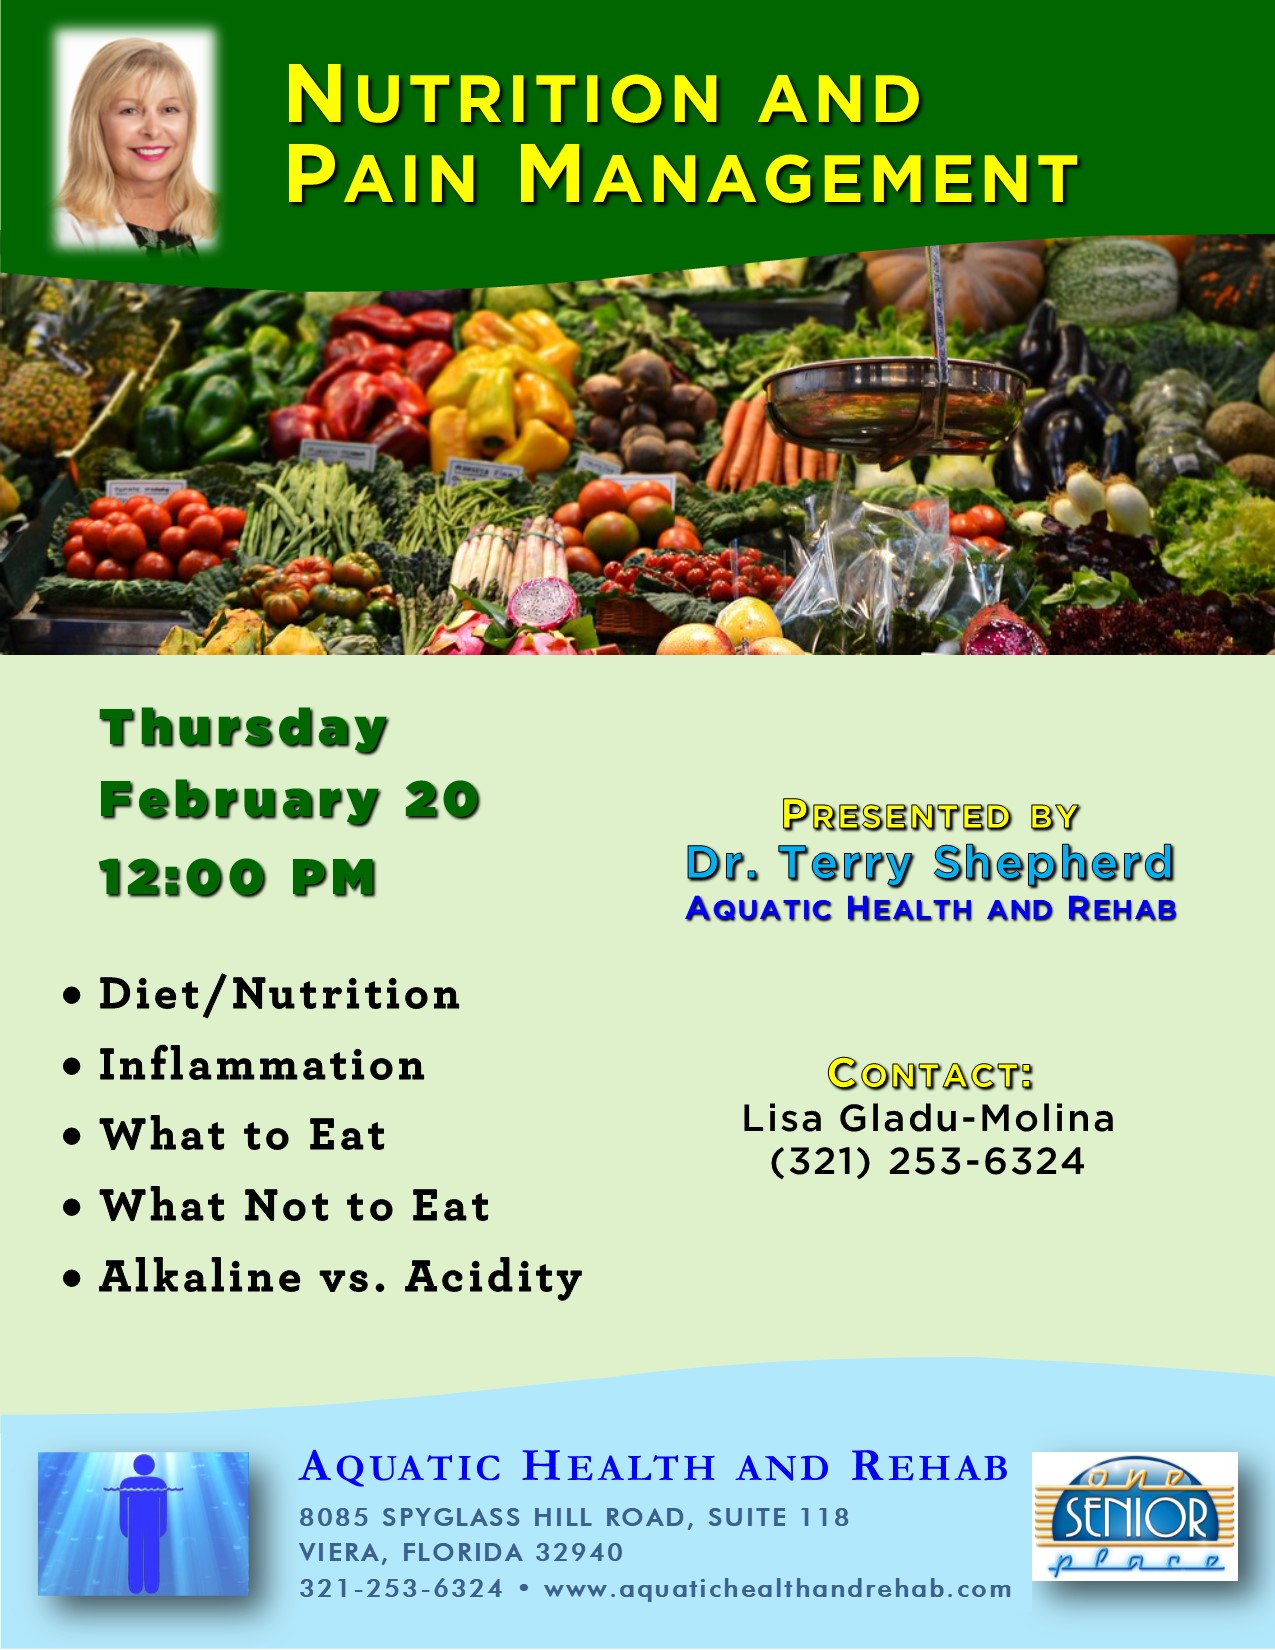 Nutrition and Pain Management presented by Aquatic Health and Rehab